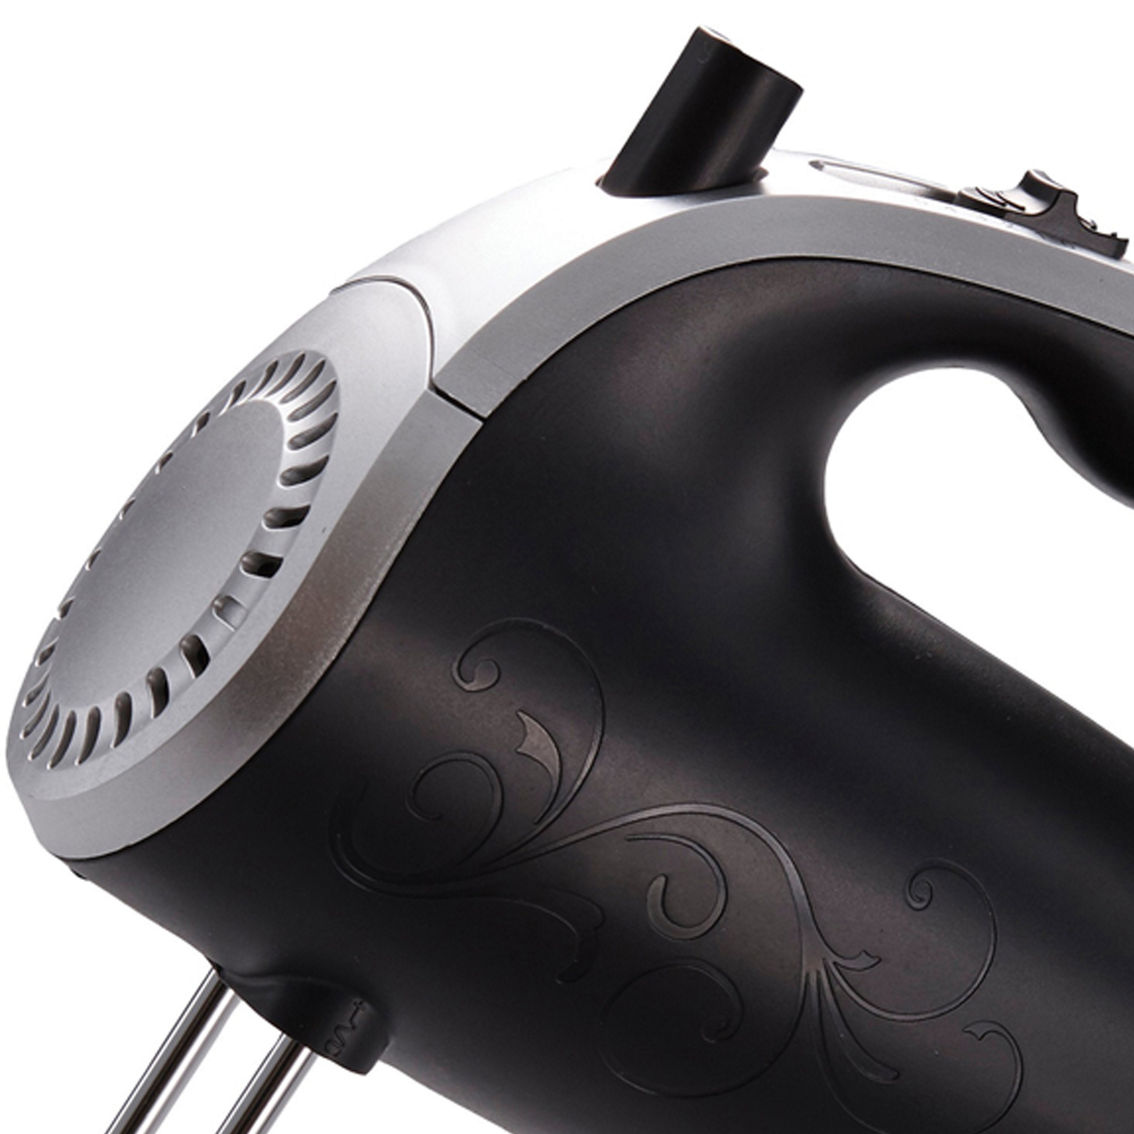 Brentwood Lightweight 5-Speed Black Electric Hand Mixer - Image 5 of 7